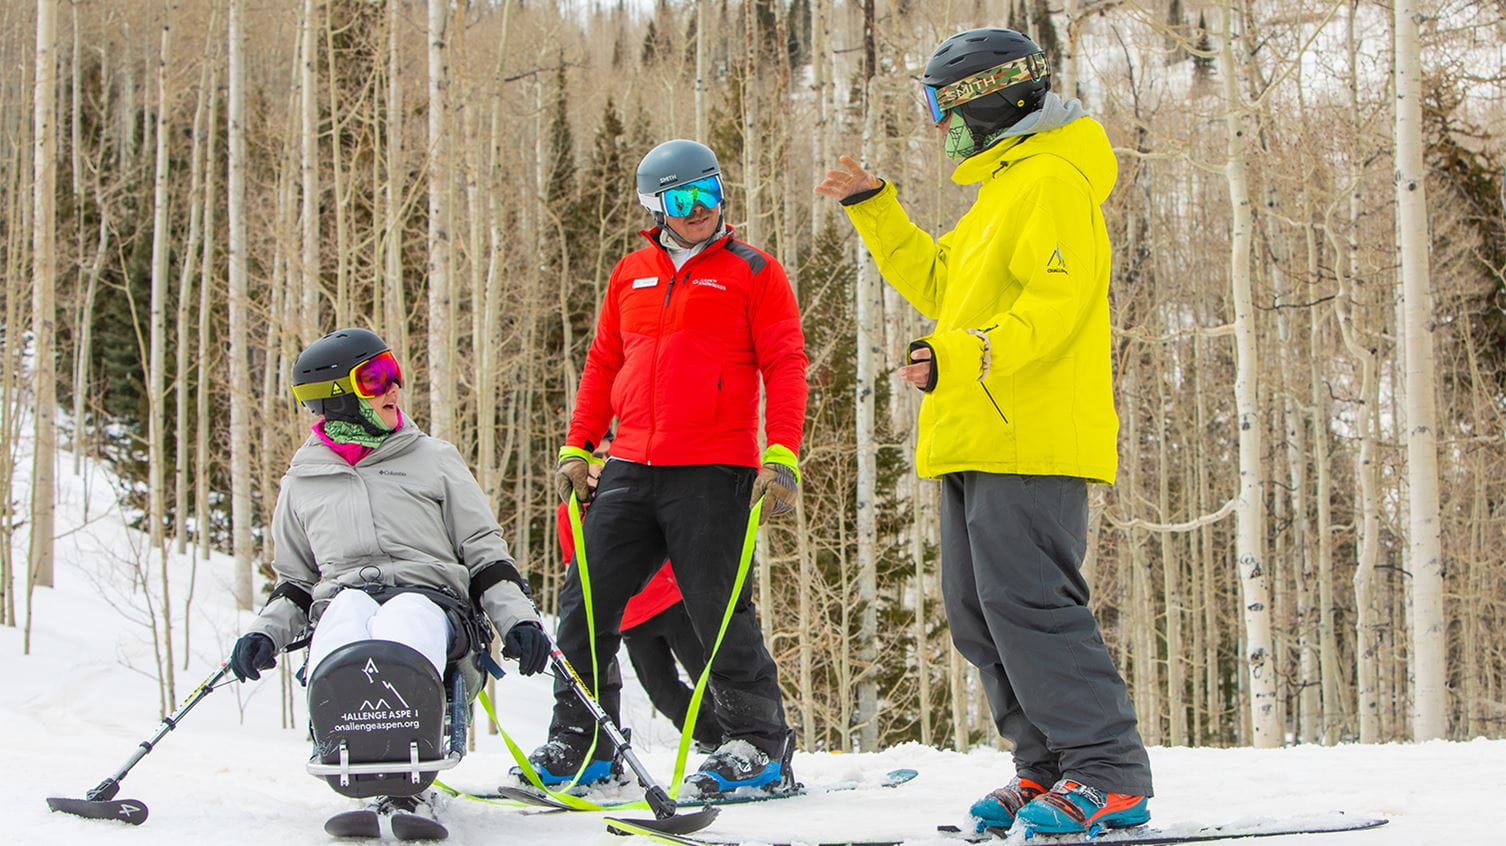 Accessibility Skier at Aspen Snowmass